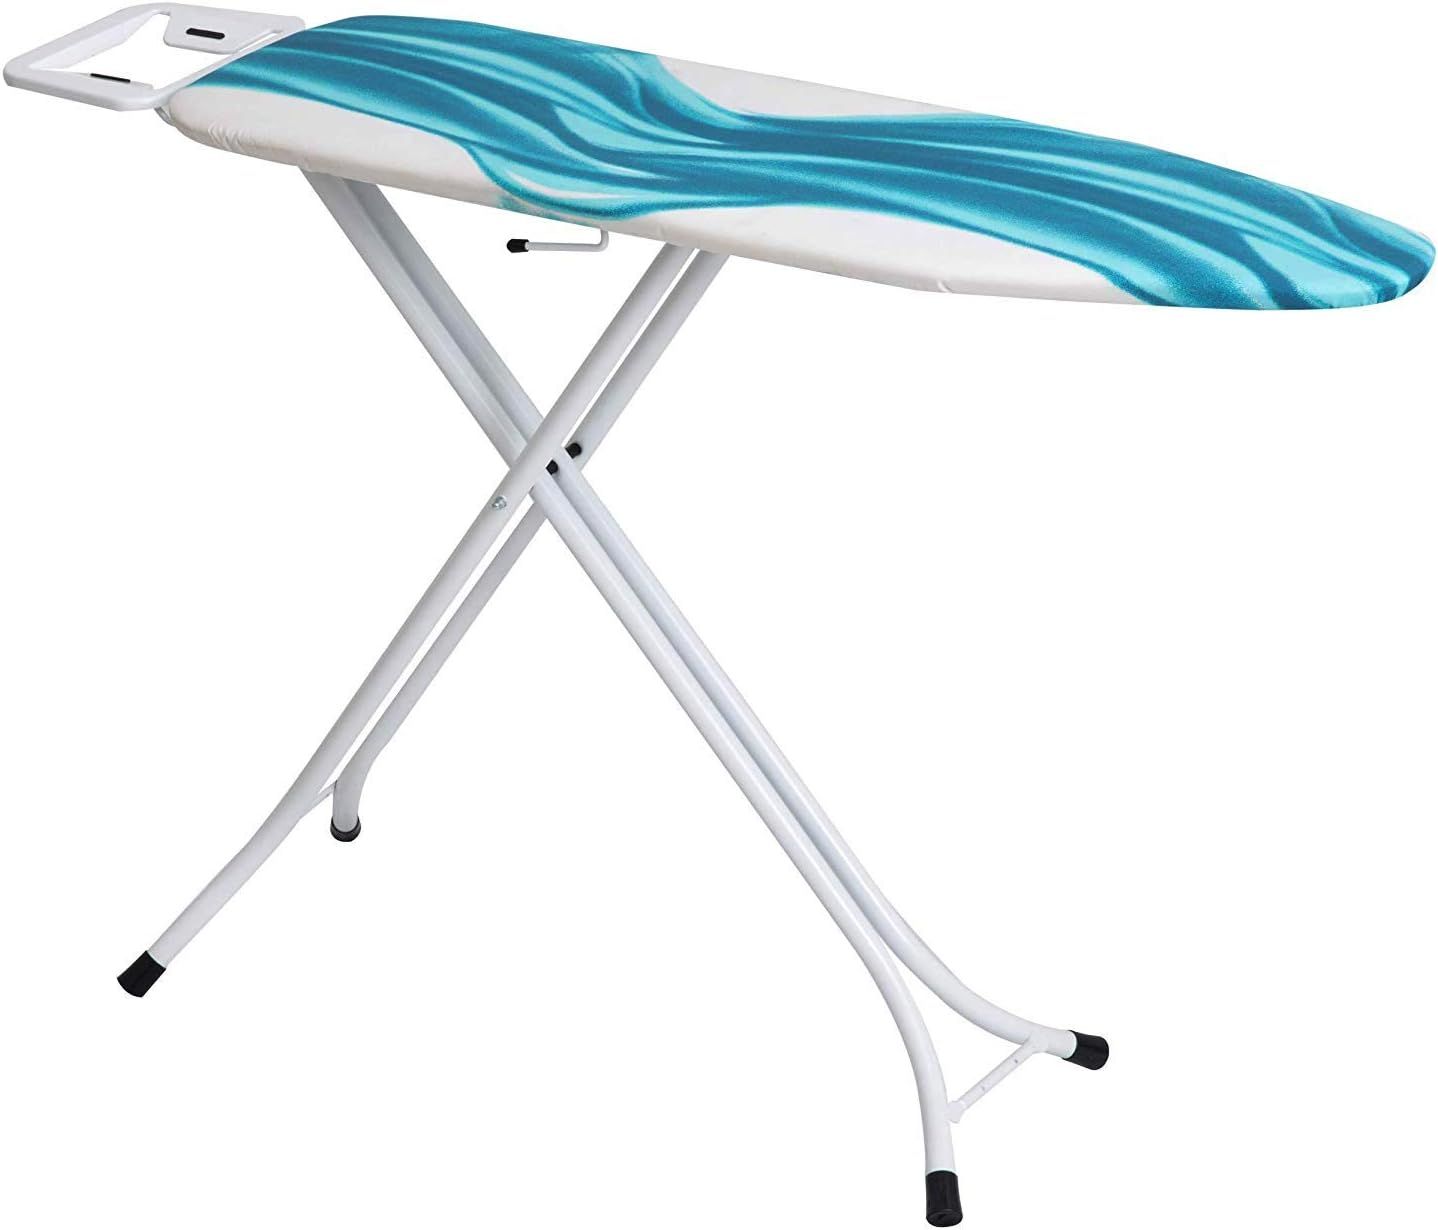 Mabel Home Adjustable Height, Deluxe, 4-Leg, Ironing Board, Extra Cover, Blue/White Patterned | Amazon (UK)